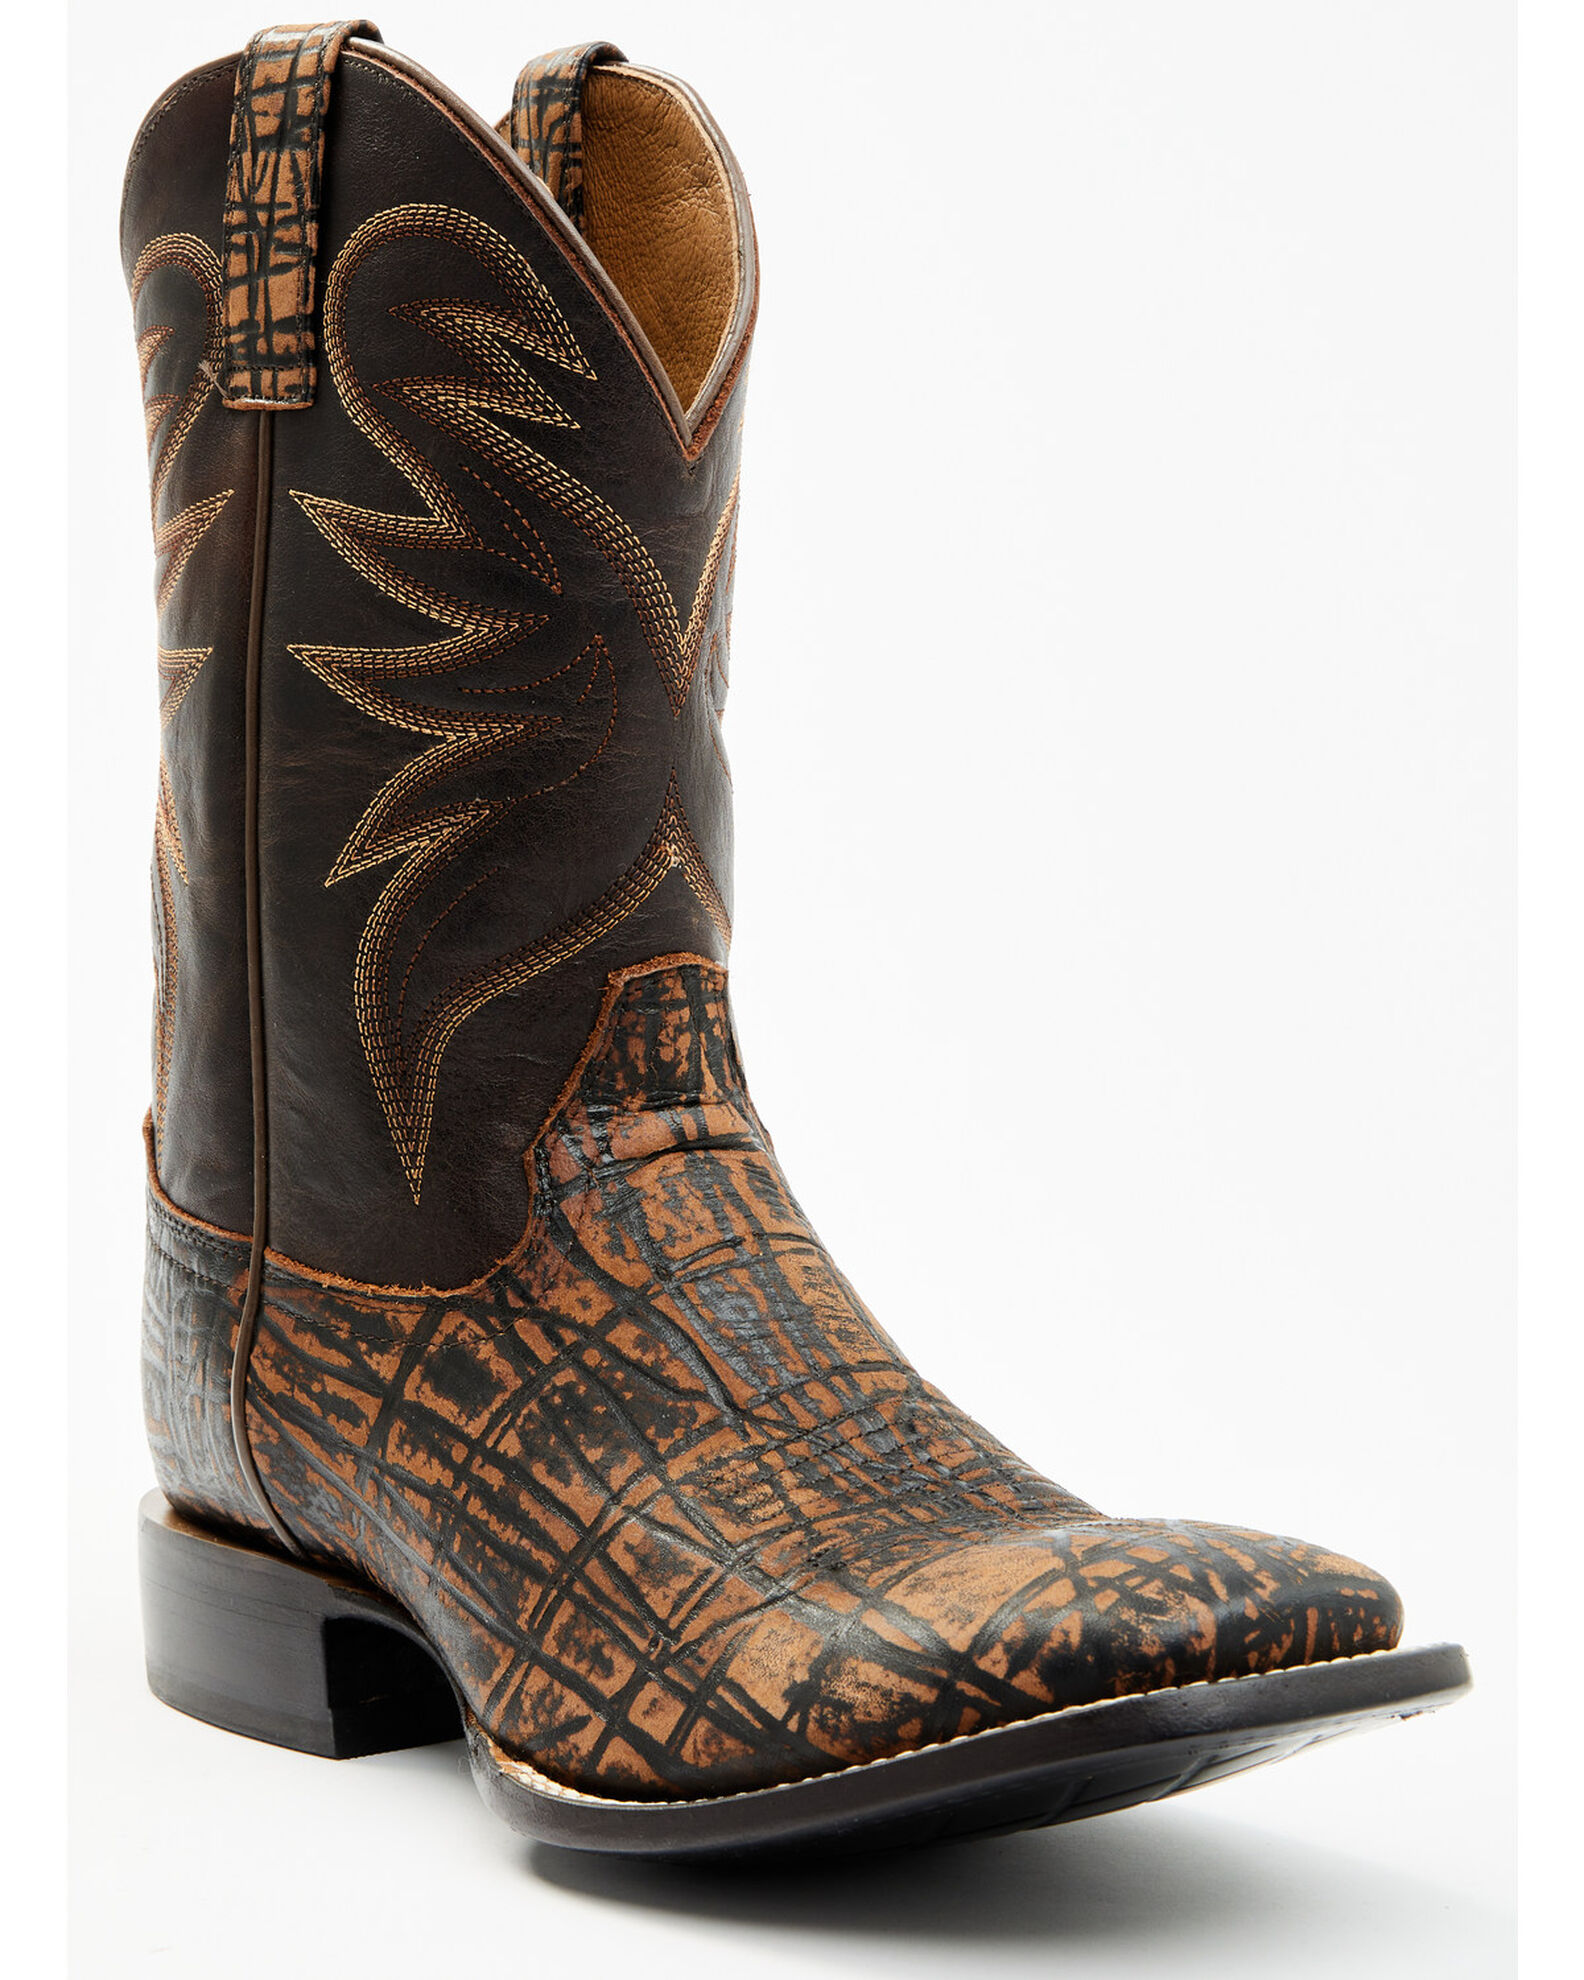 Product Name: Cody James Men's McBride Western Boots - Broad Square Toe